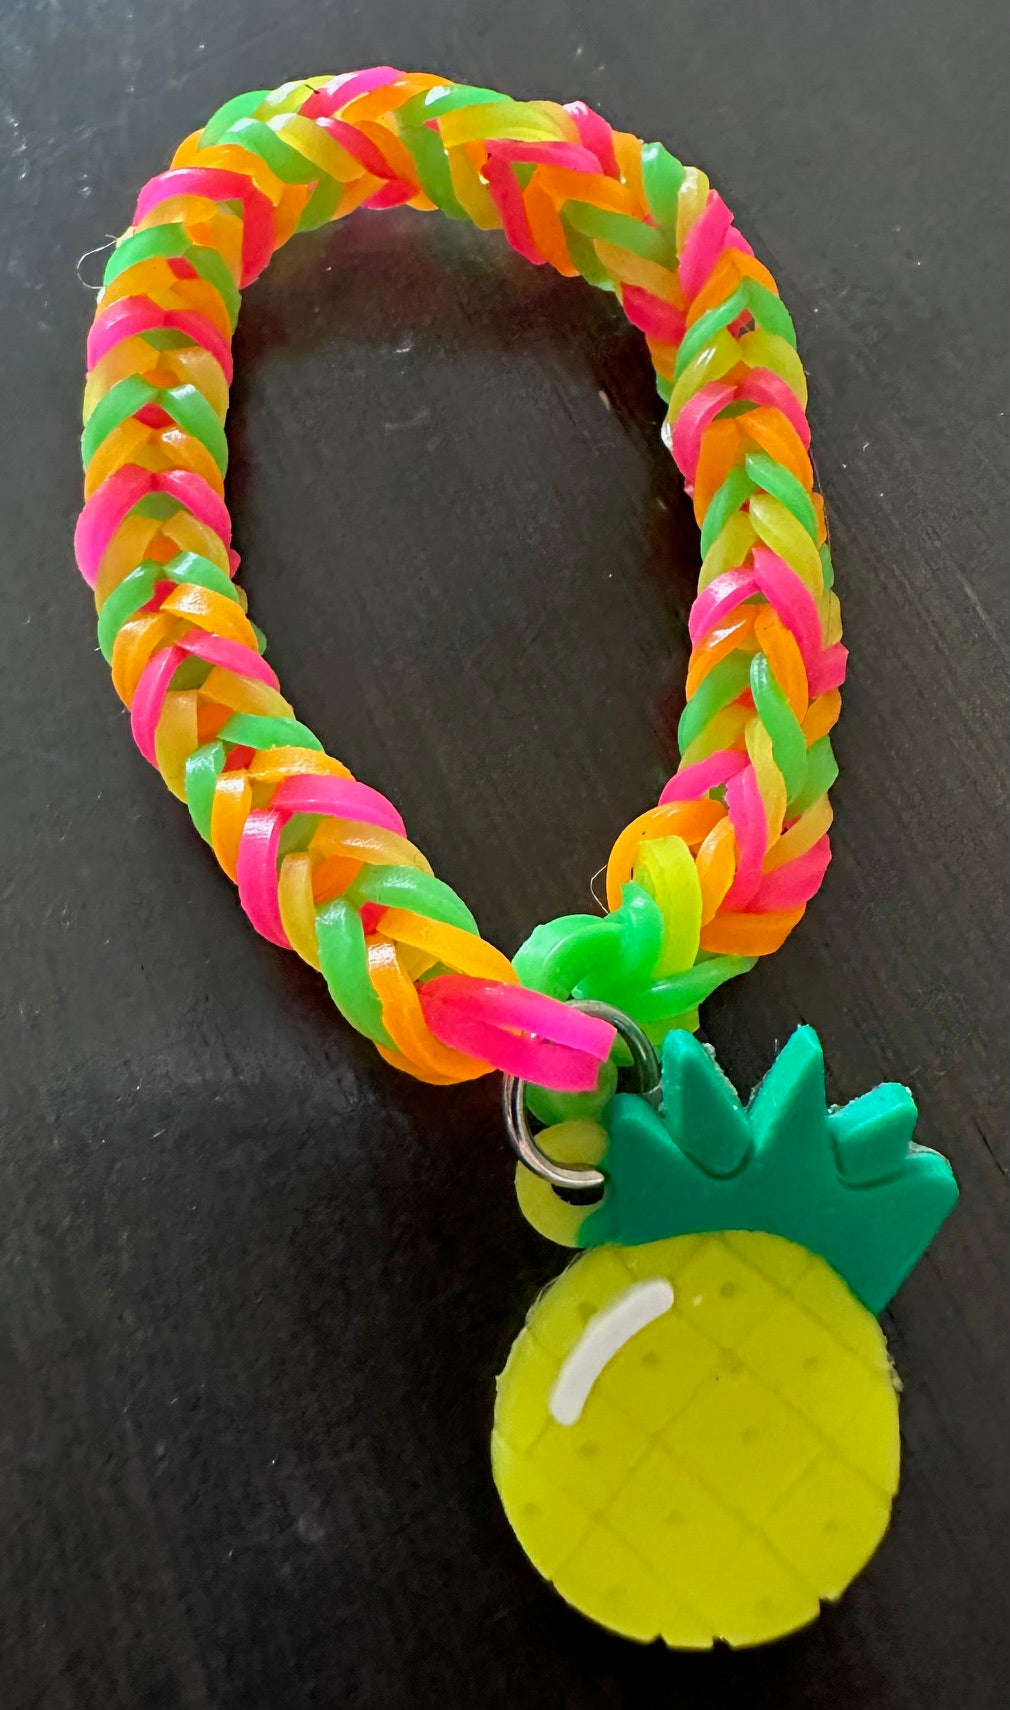 Neon-Coloured Bracelet with Pineapple Charm - Size 4-7